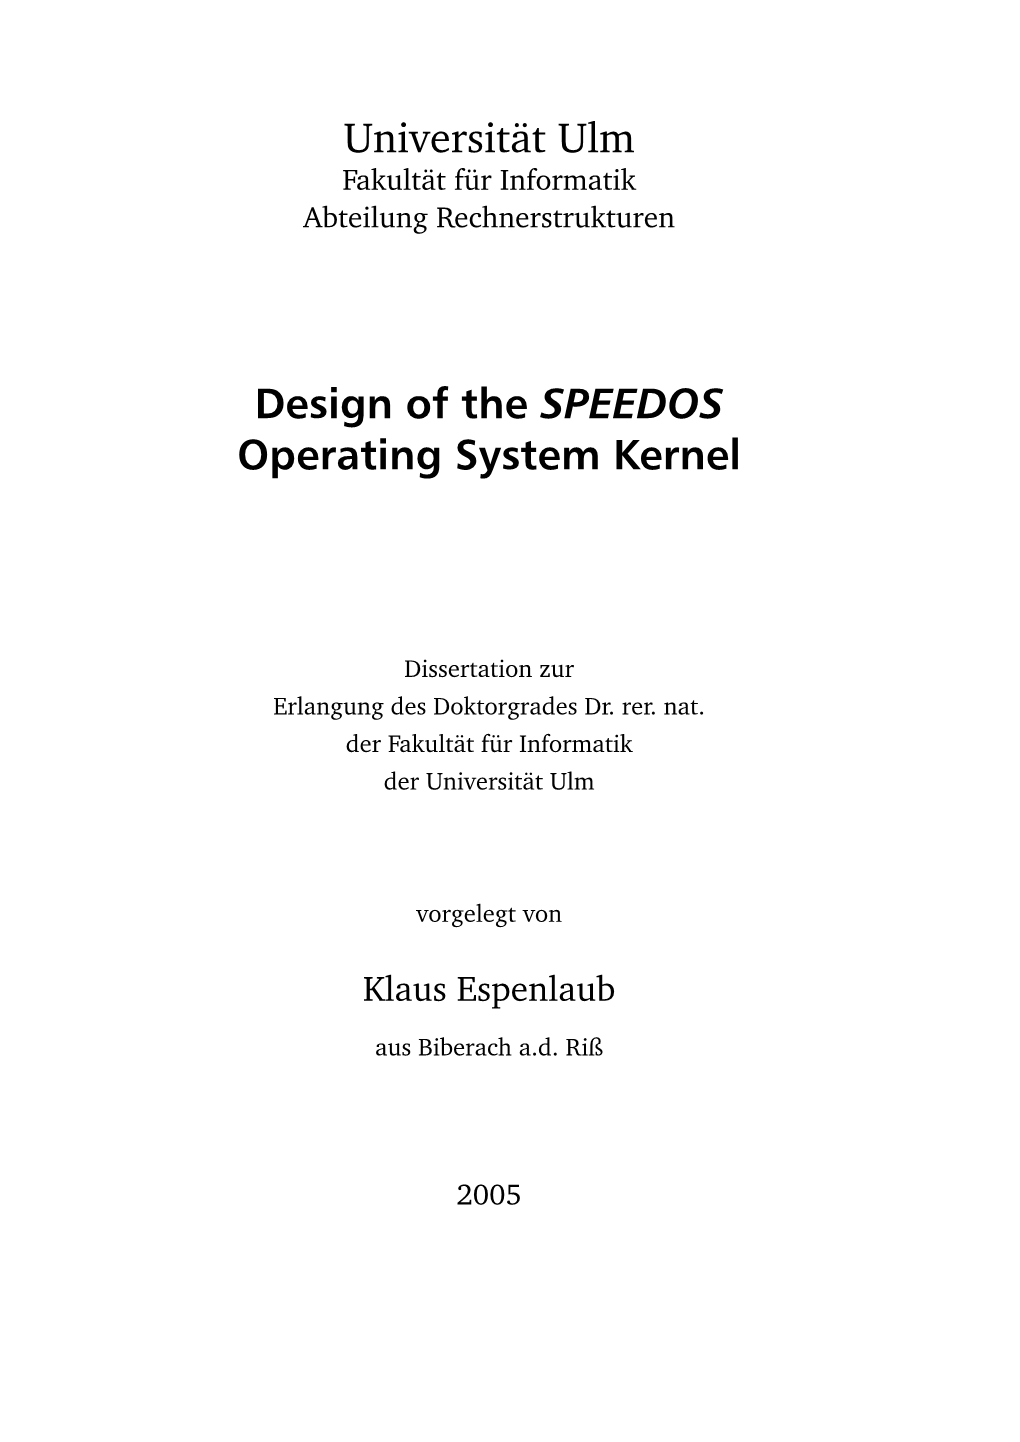 Design of the SPEEDOS Operating System Kernel